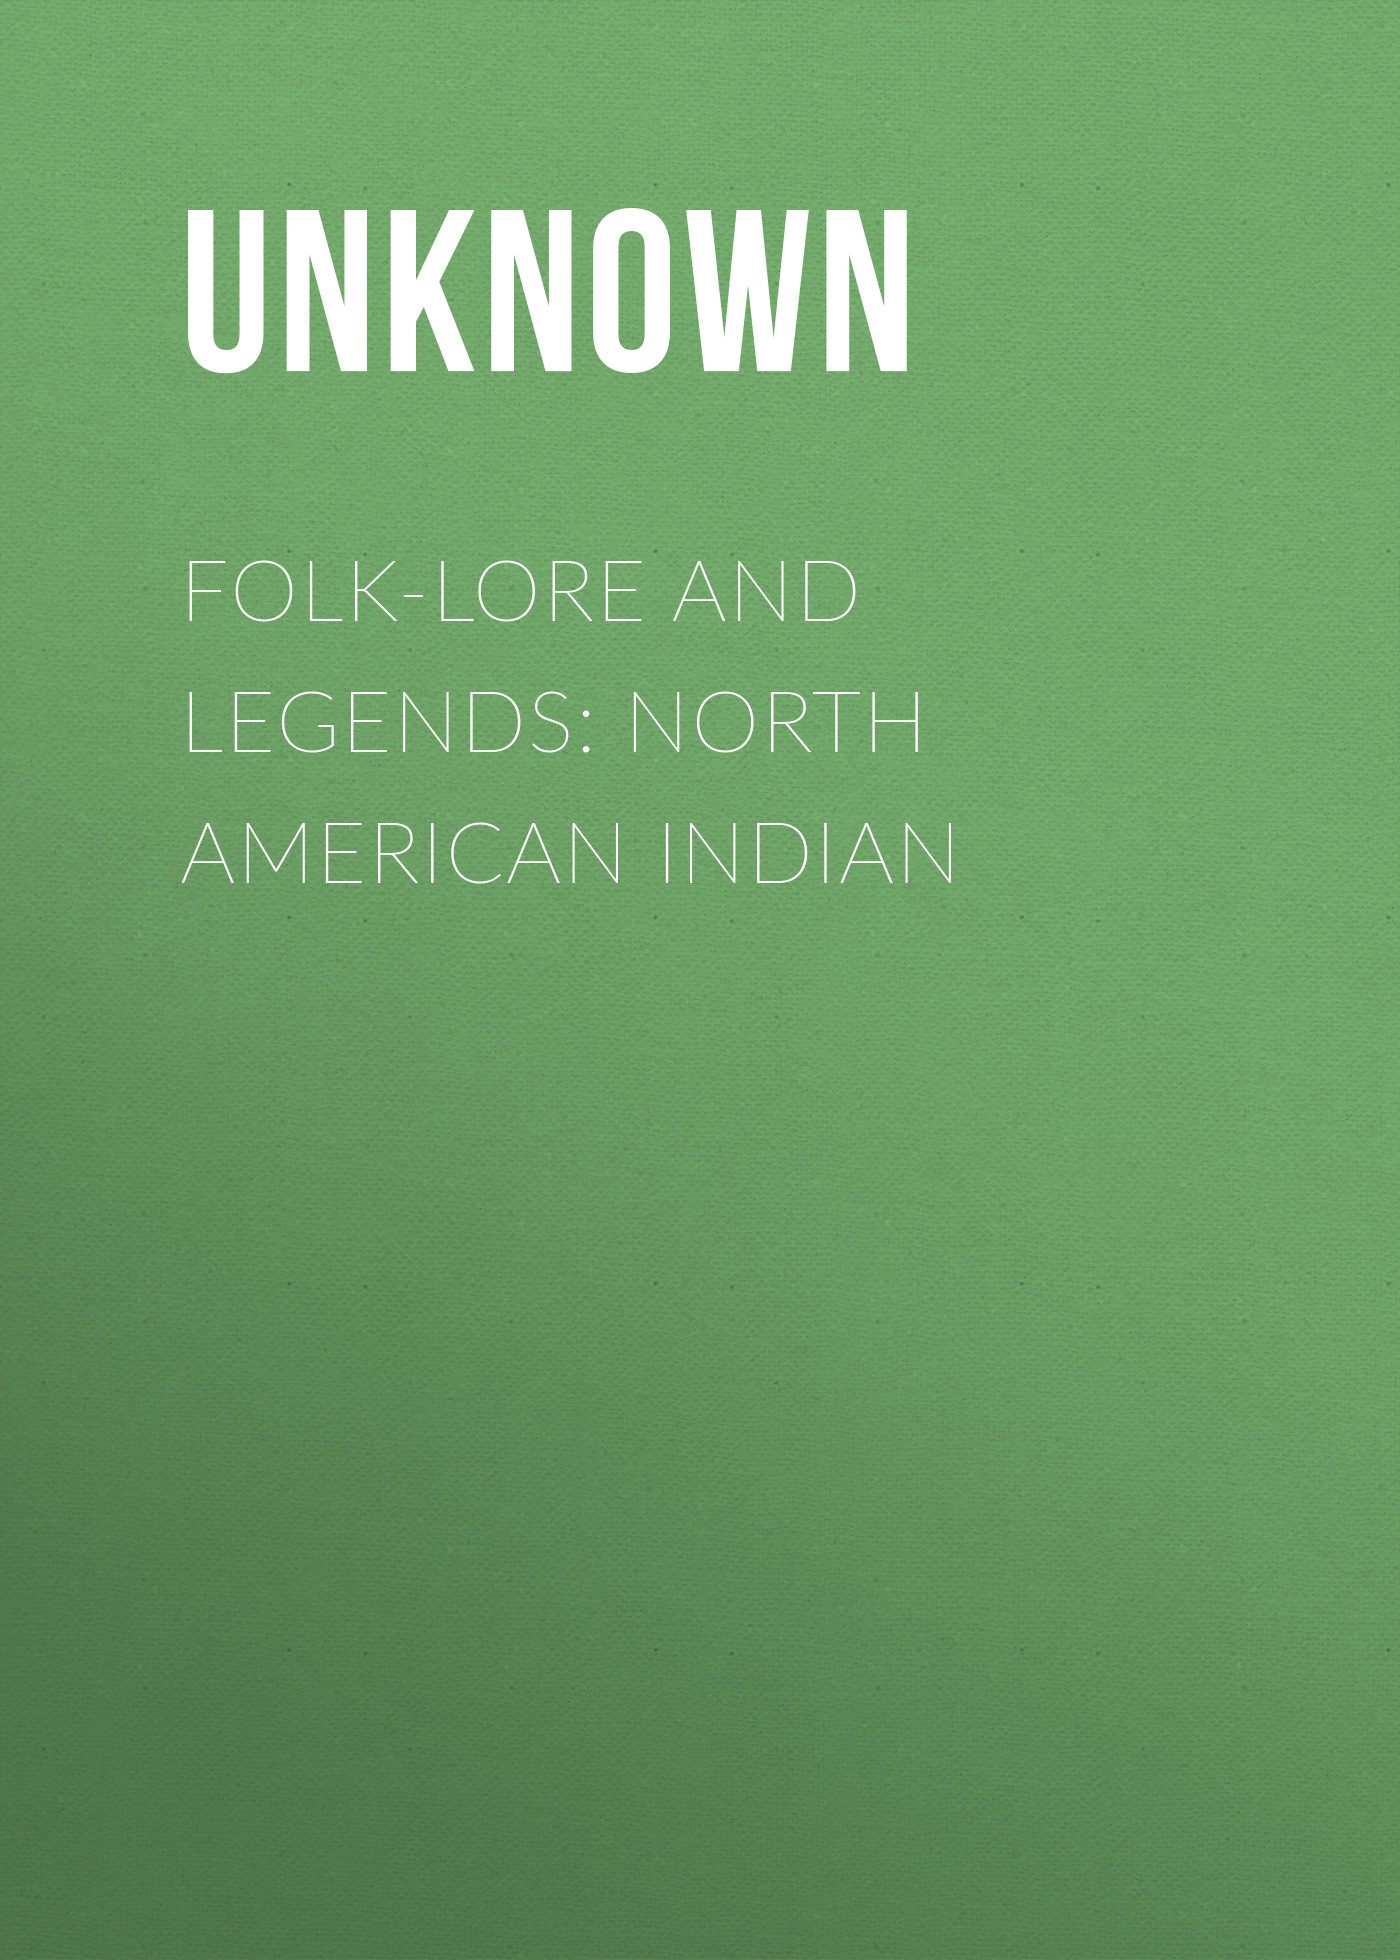 Unknown Folk-Lore and Legends: North American Indian